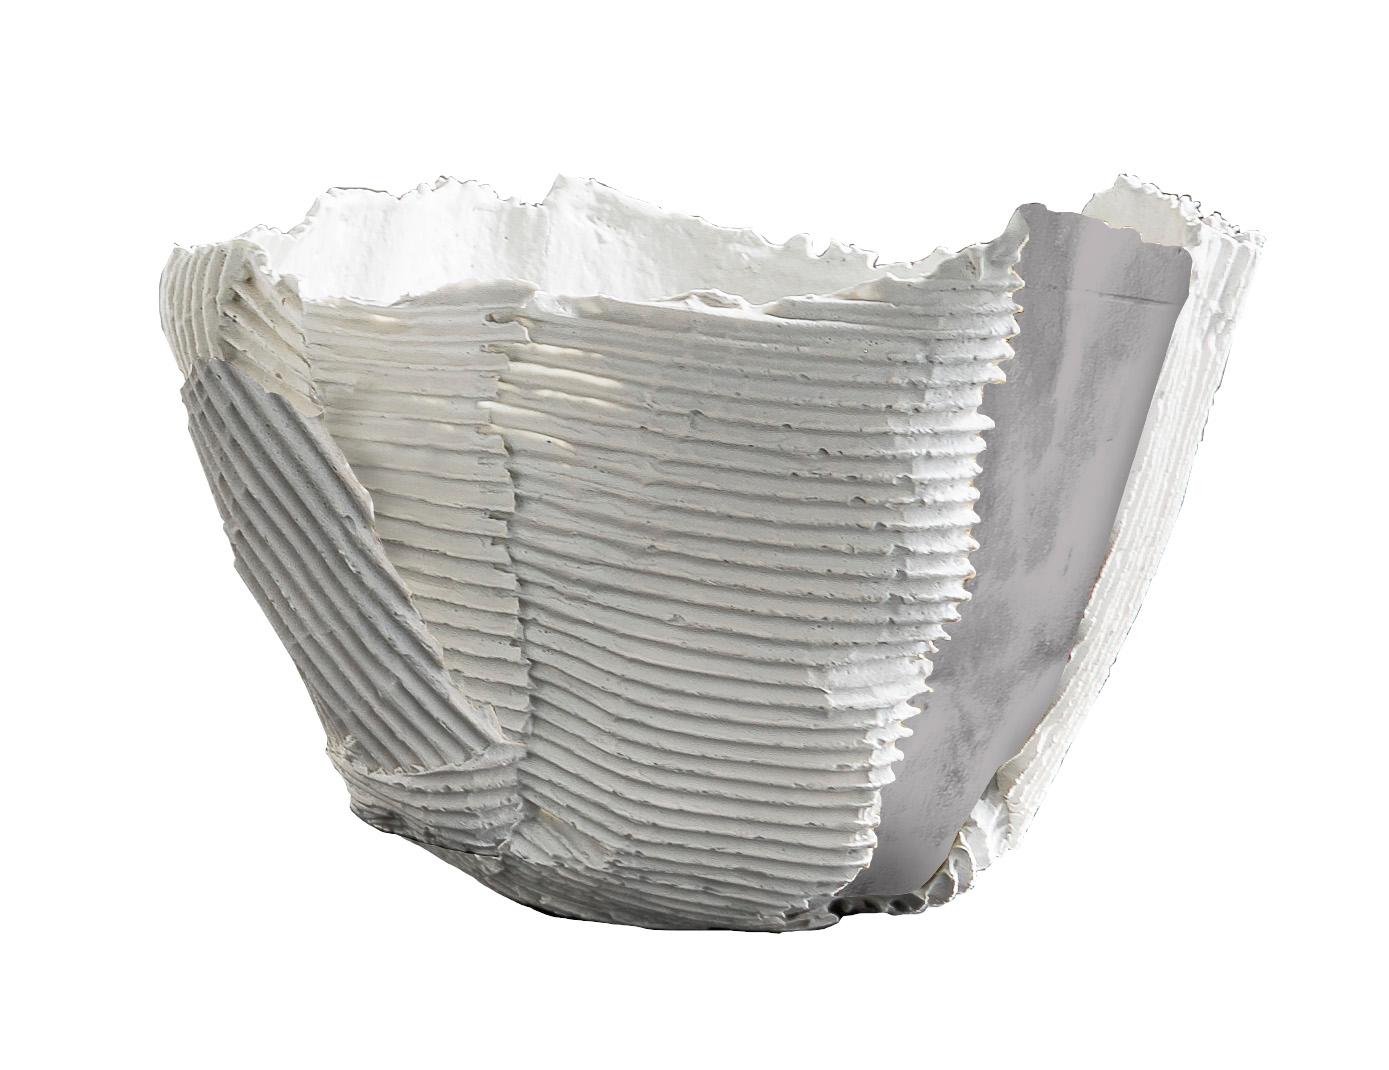 The bowl boasts randomly drawn horizontal and vertical ridges and a single smooth gray panel, creating a visually striking work of functional decor. Entirely handmade of paper clay, a combination of paper pulp and fiber mixed into the ceramic base